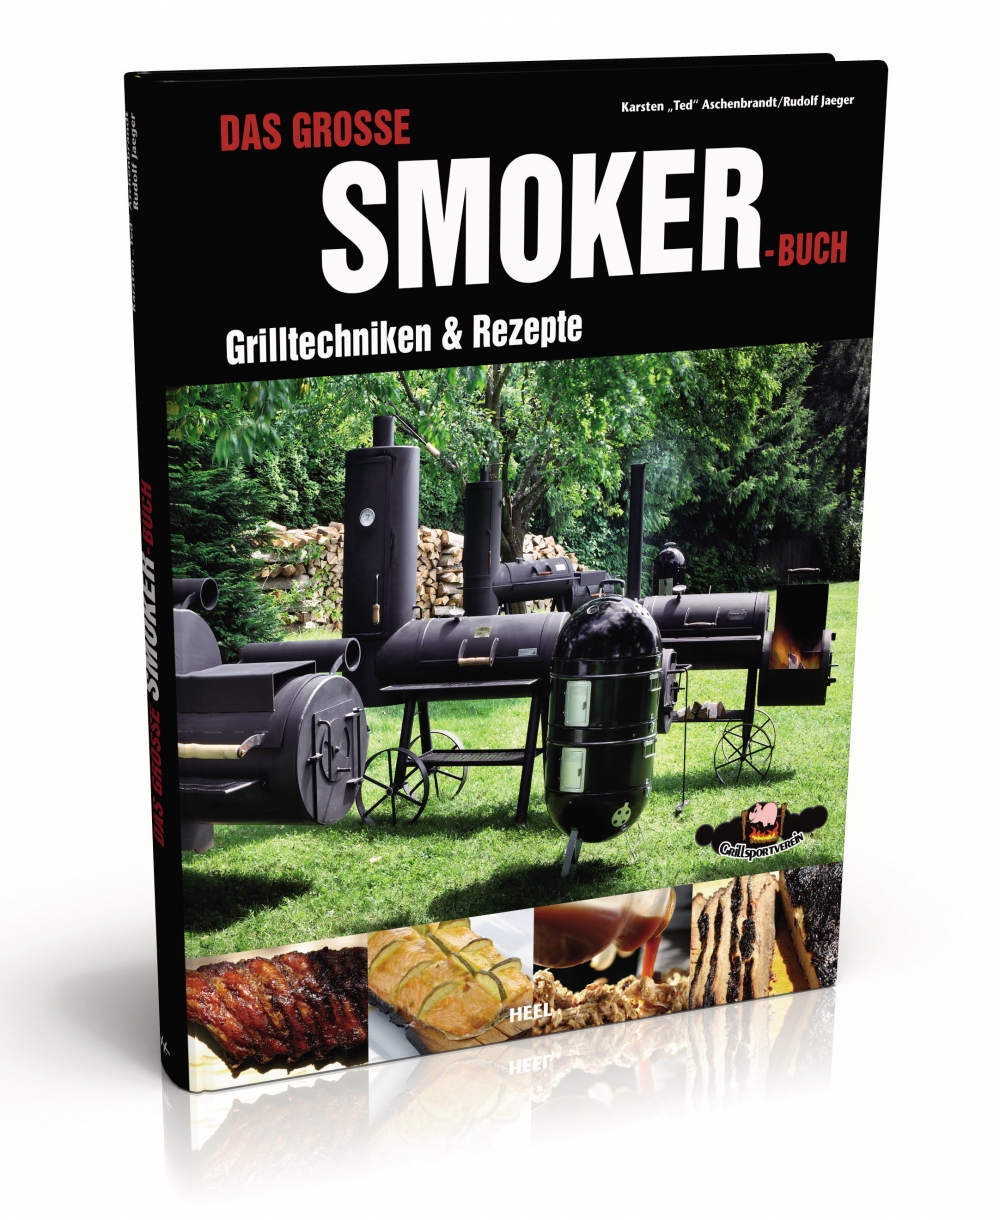 The Great Smoker Book - Grilling Techniques & Reci